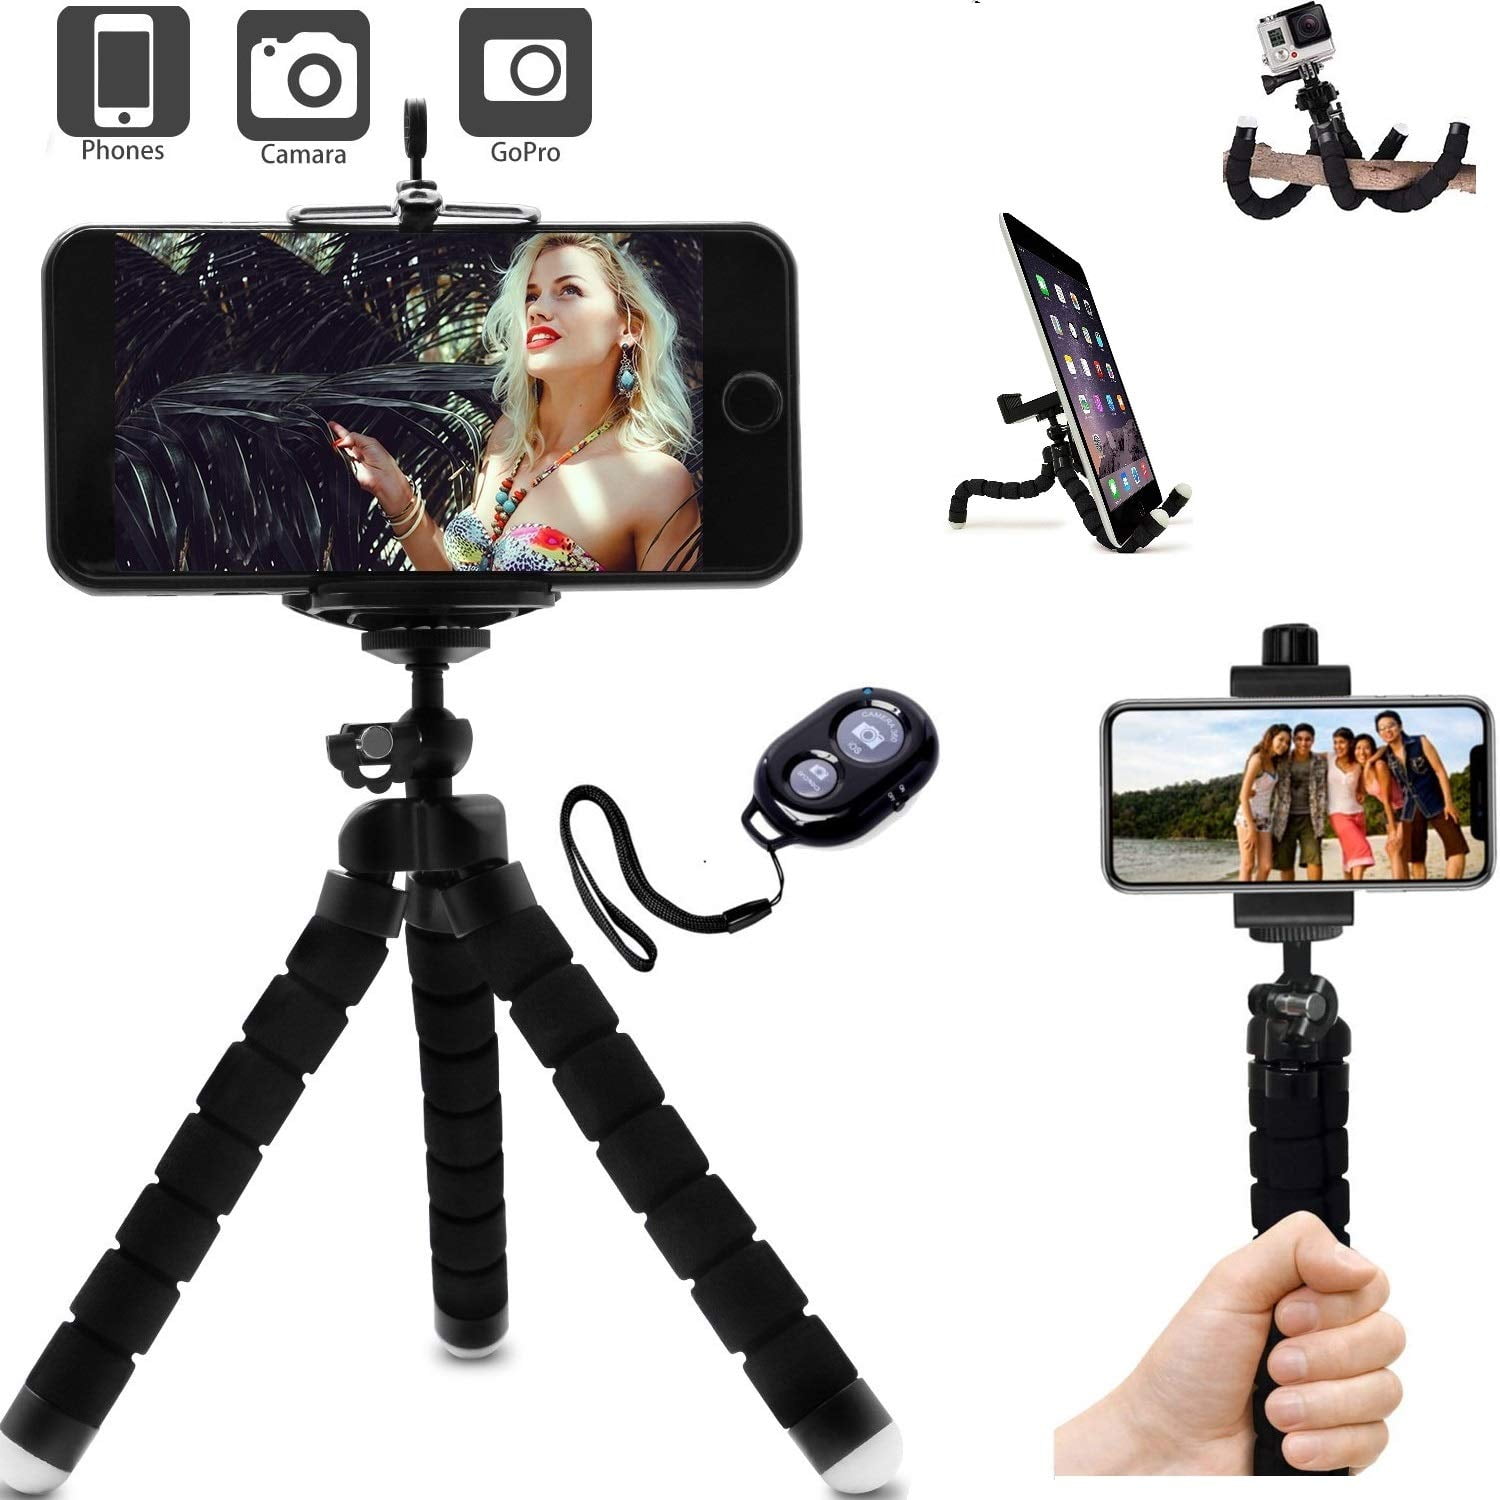 Tripod For Camera With Bluetooth Remote And Adapter For iPhone Samsung And More Smartphones TF-3120 Noir Tefeng